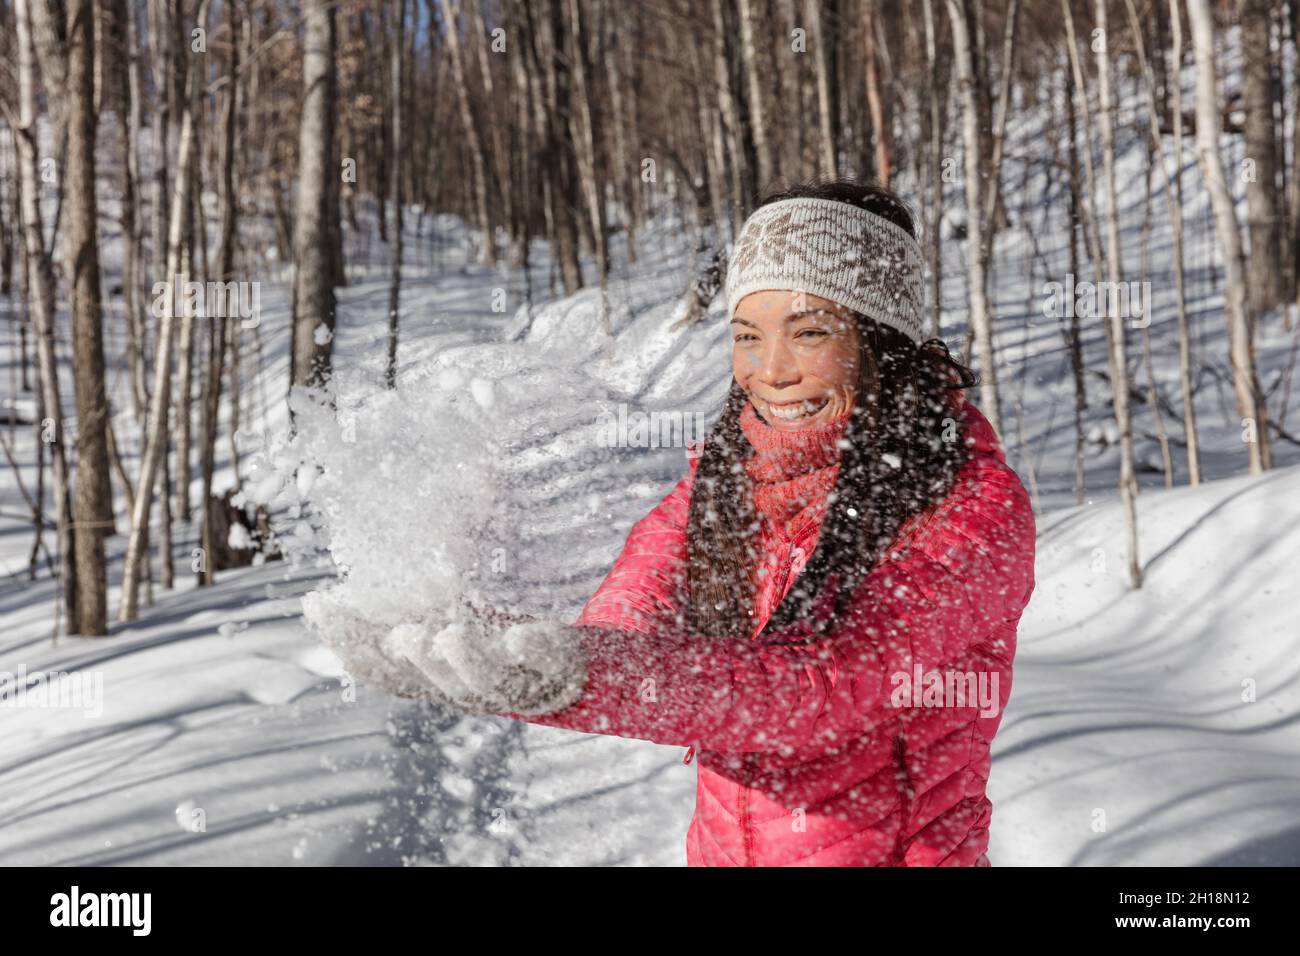 Winter fun Asian girl throwing cold snow in the air playing in forest. Winter season lifestyle Stock Photo